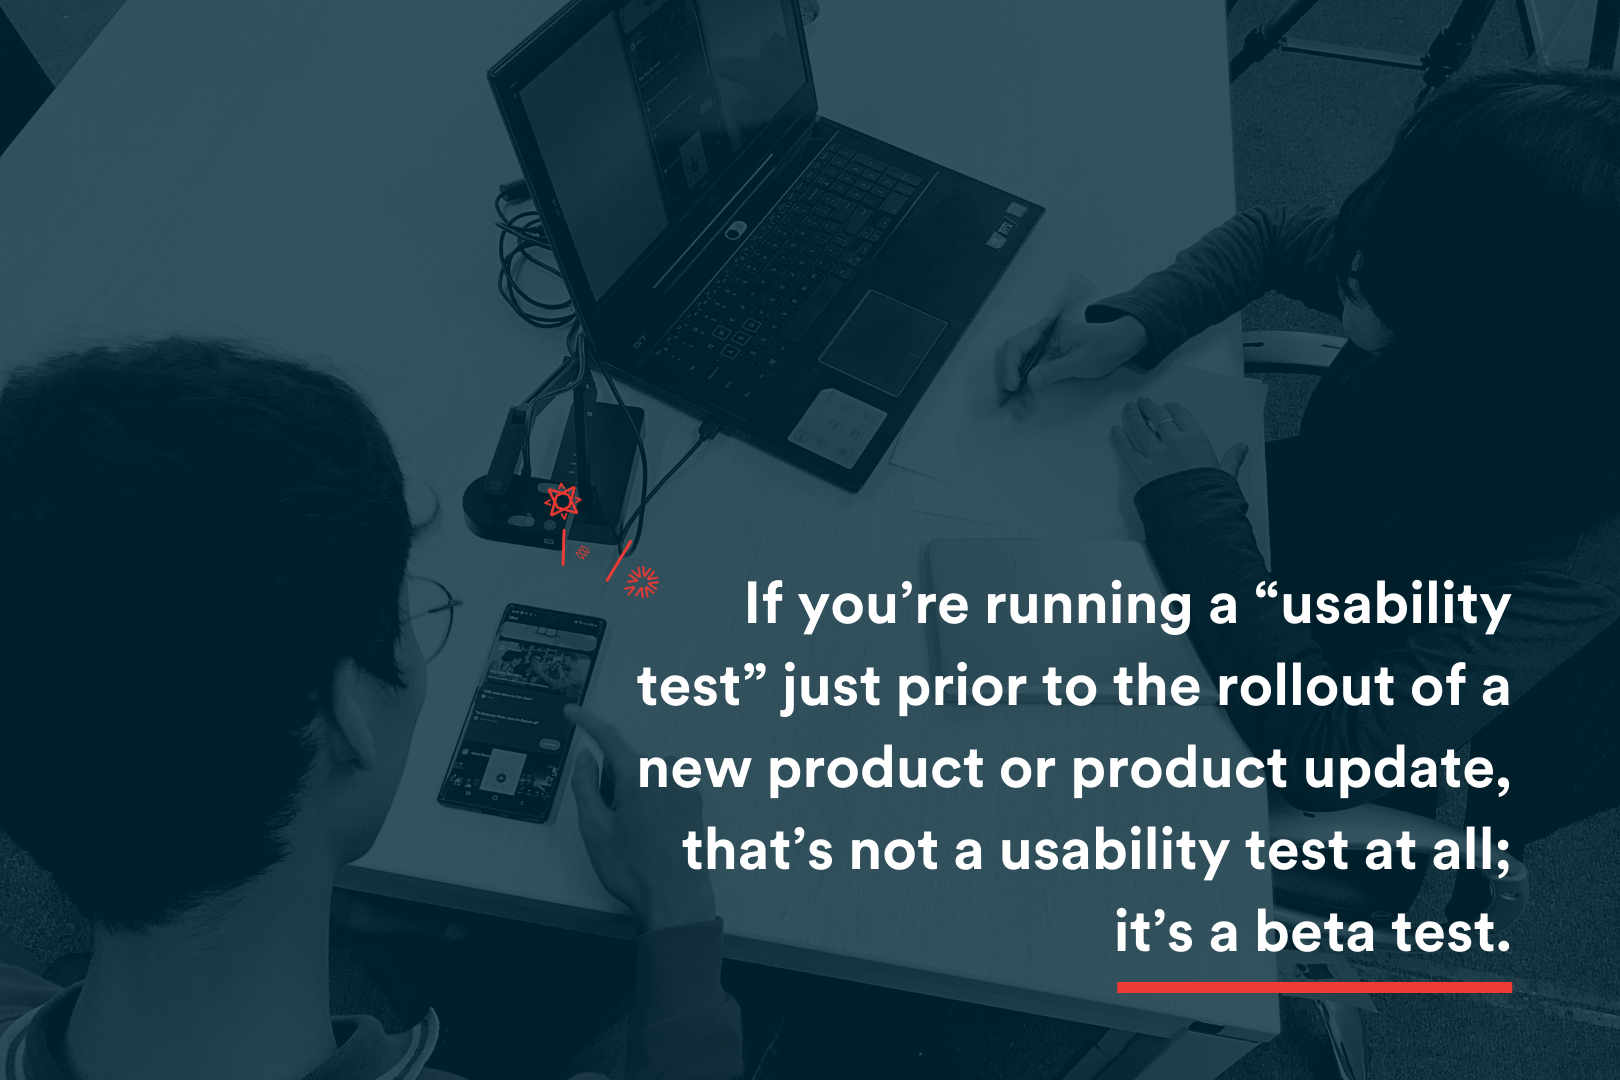 In Blog Image - If you’re running a “usability test” just prior to the rollout of a new product or product update, that’s not a usability test at all; it’s a beta test.